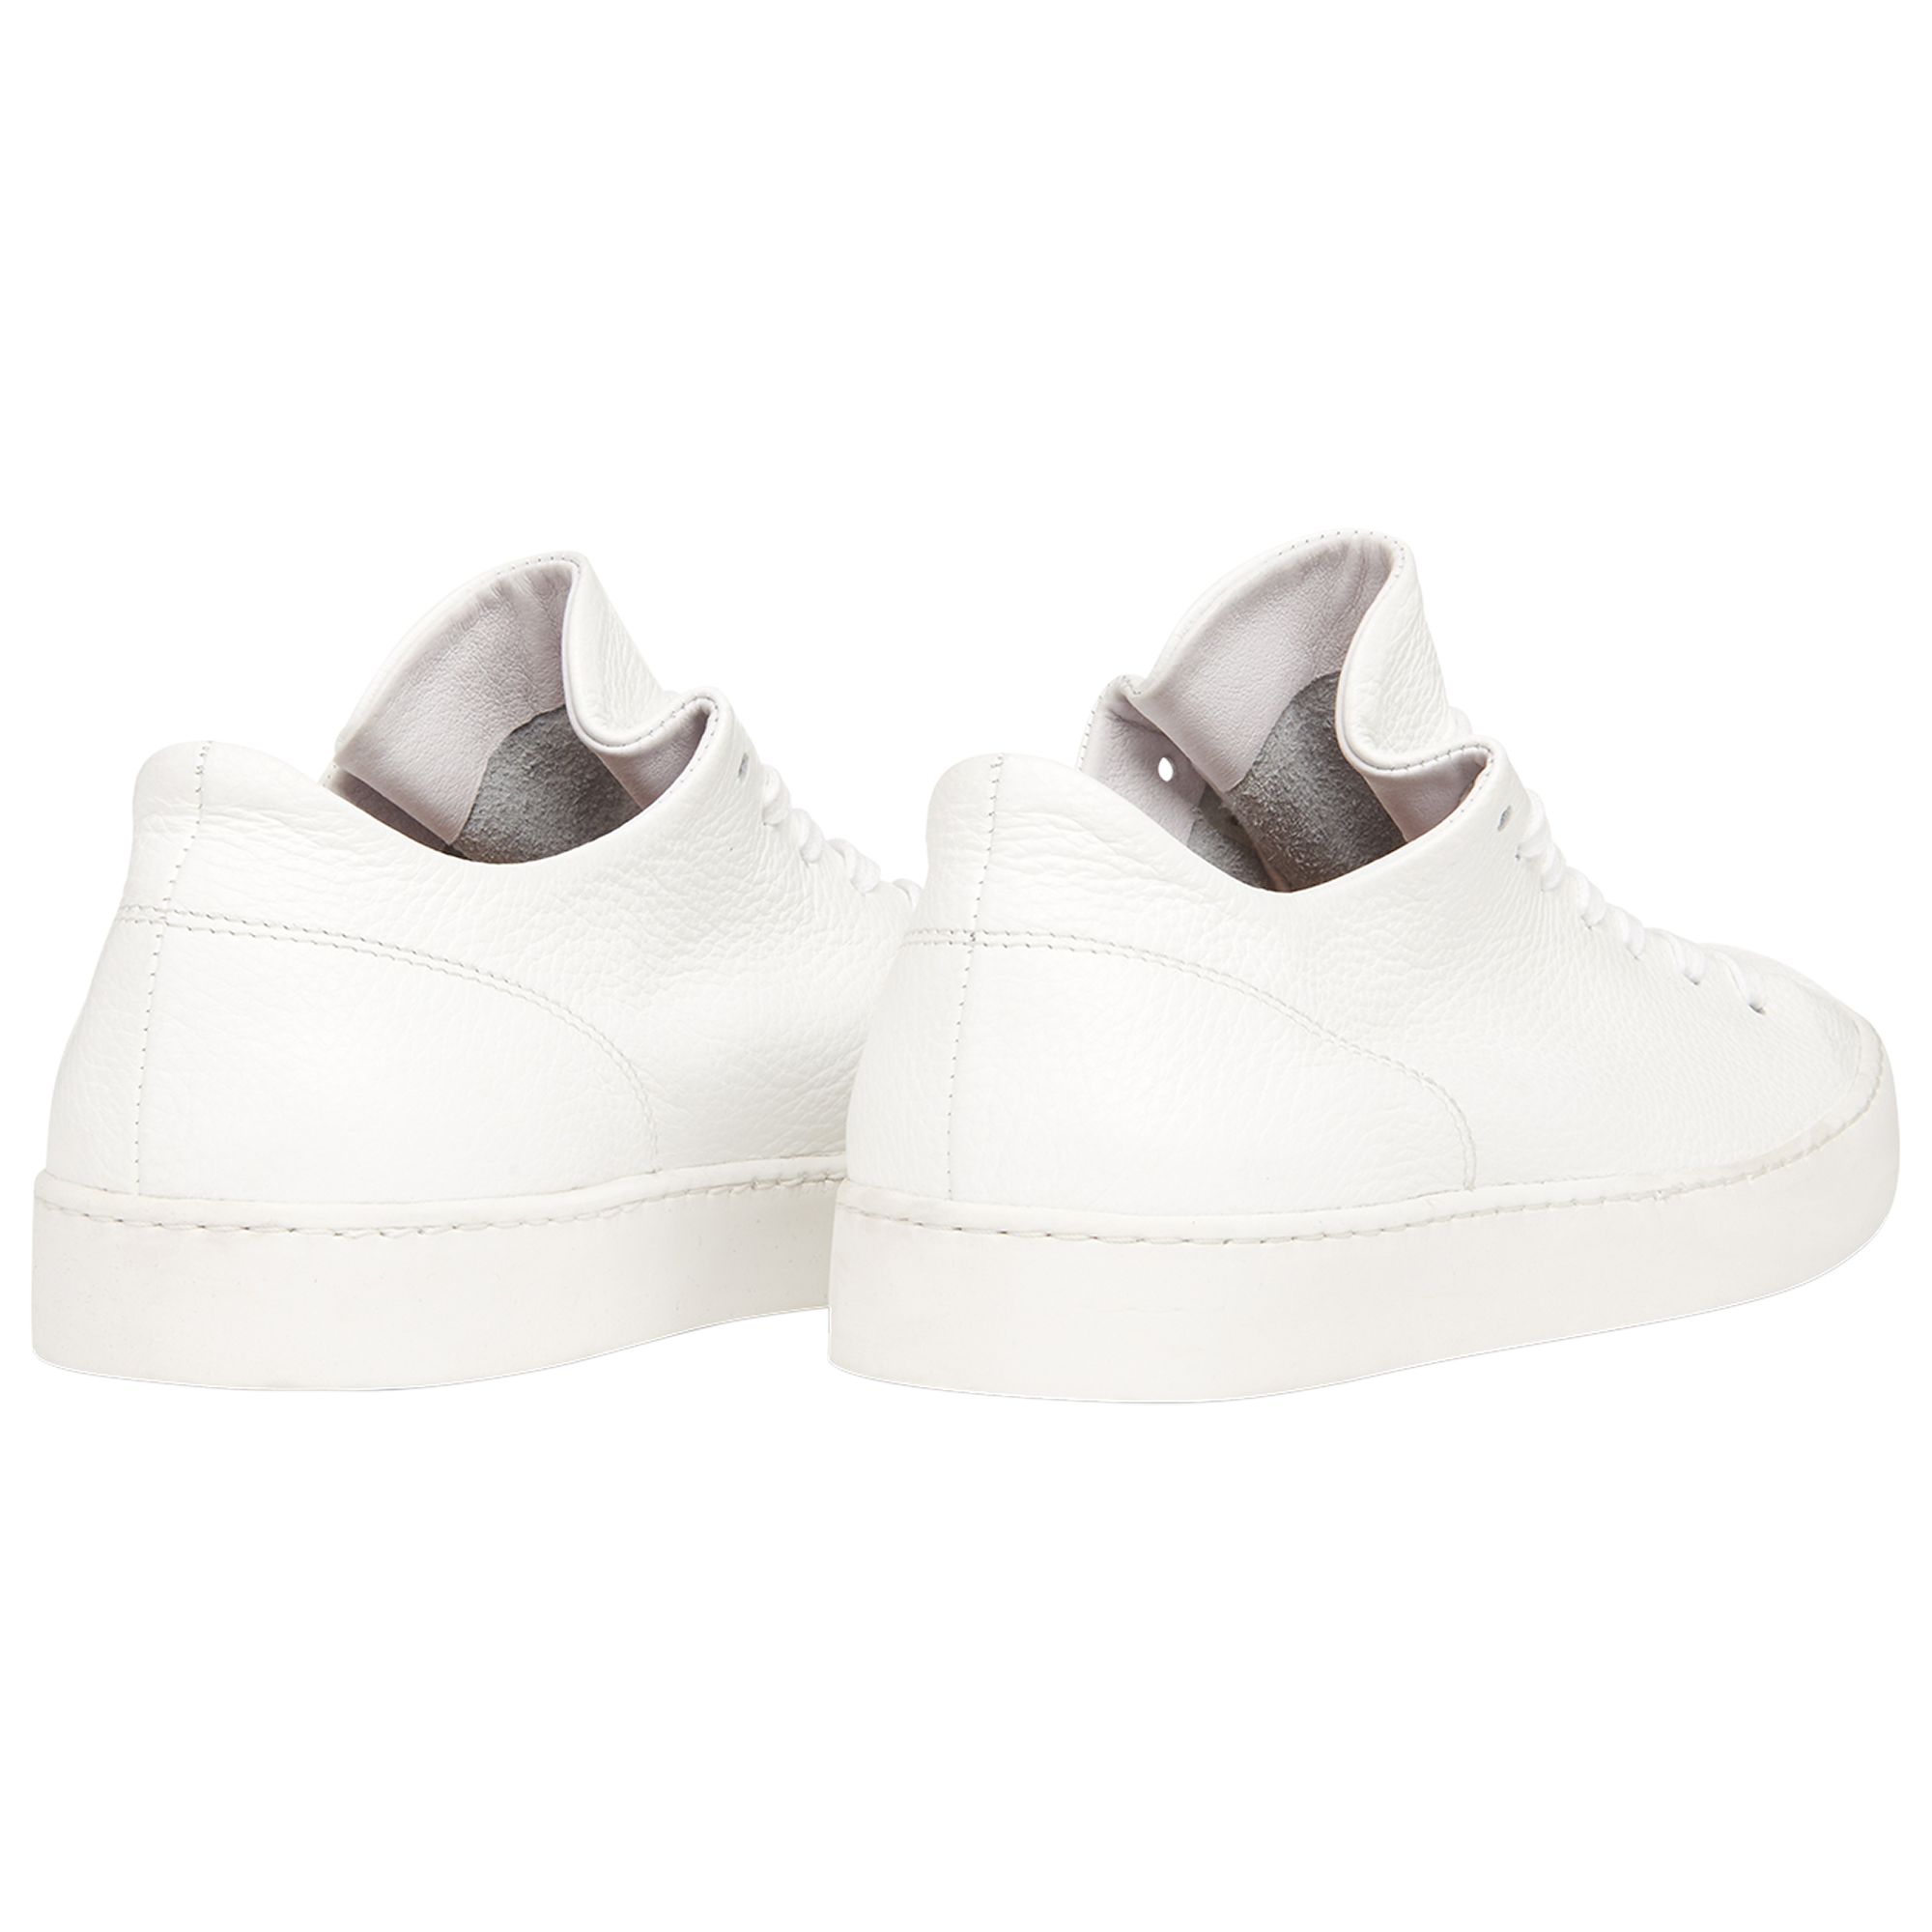 Whistles Folly Leather Unlined Soft Trainers, White at John Lewis ...